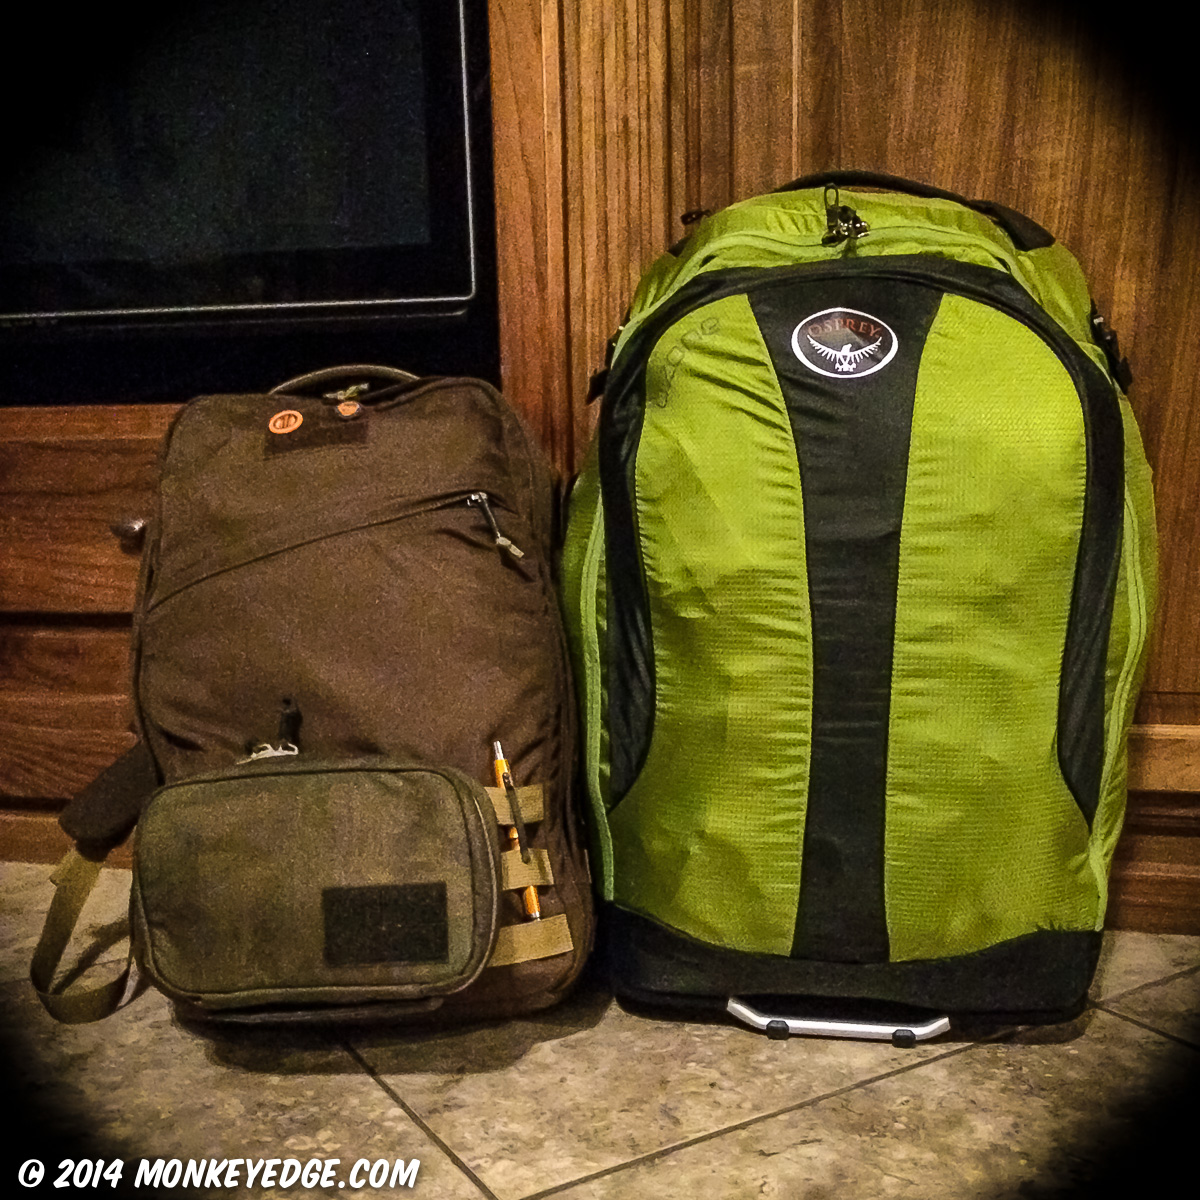 Bags packed for Starlingear Japan Tour 2014